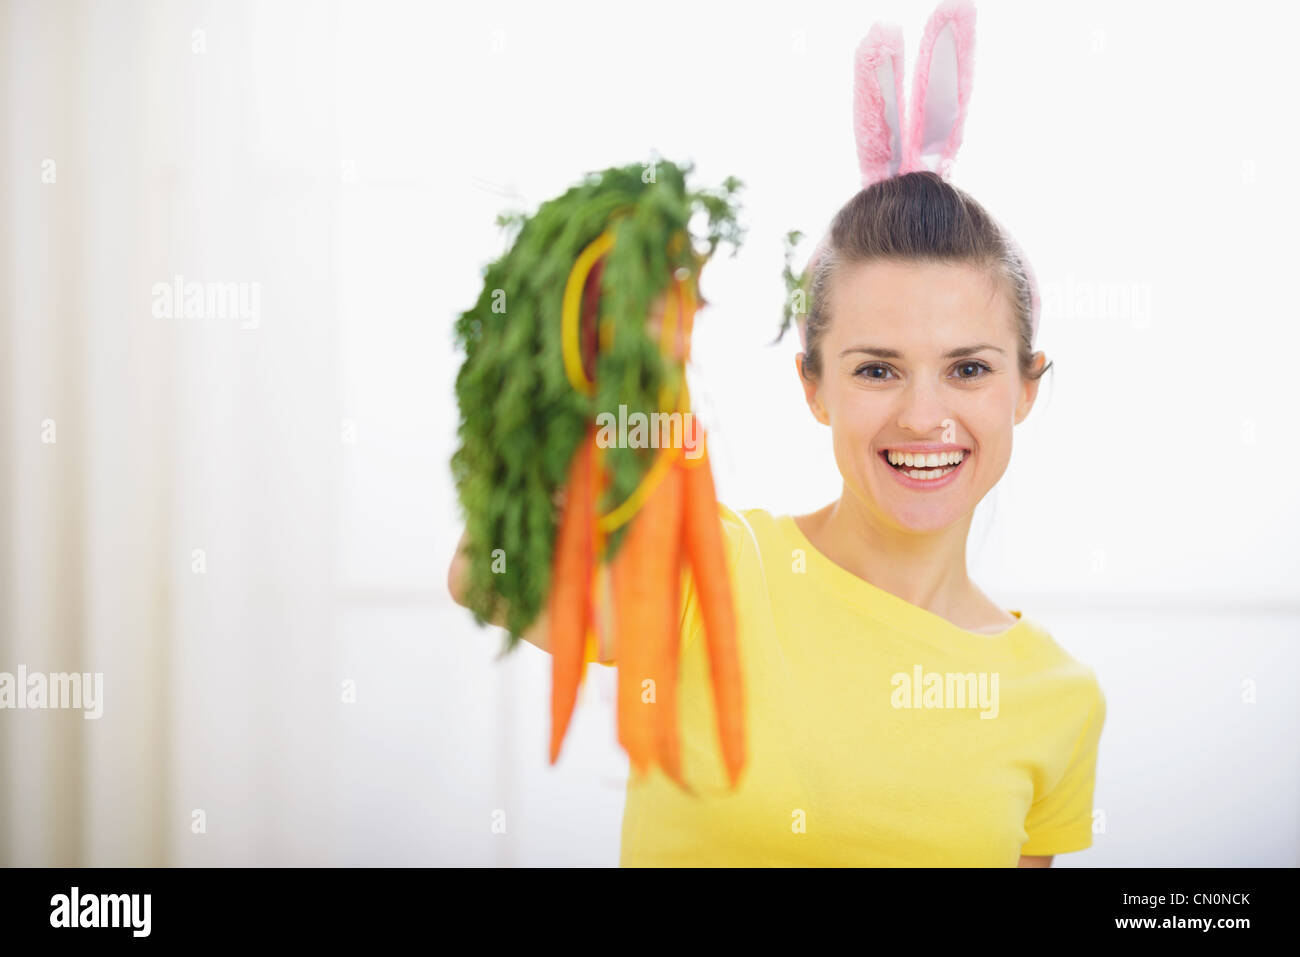 Smiling woman in rabbit ears showing bunch of carrots Stock Photo